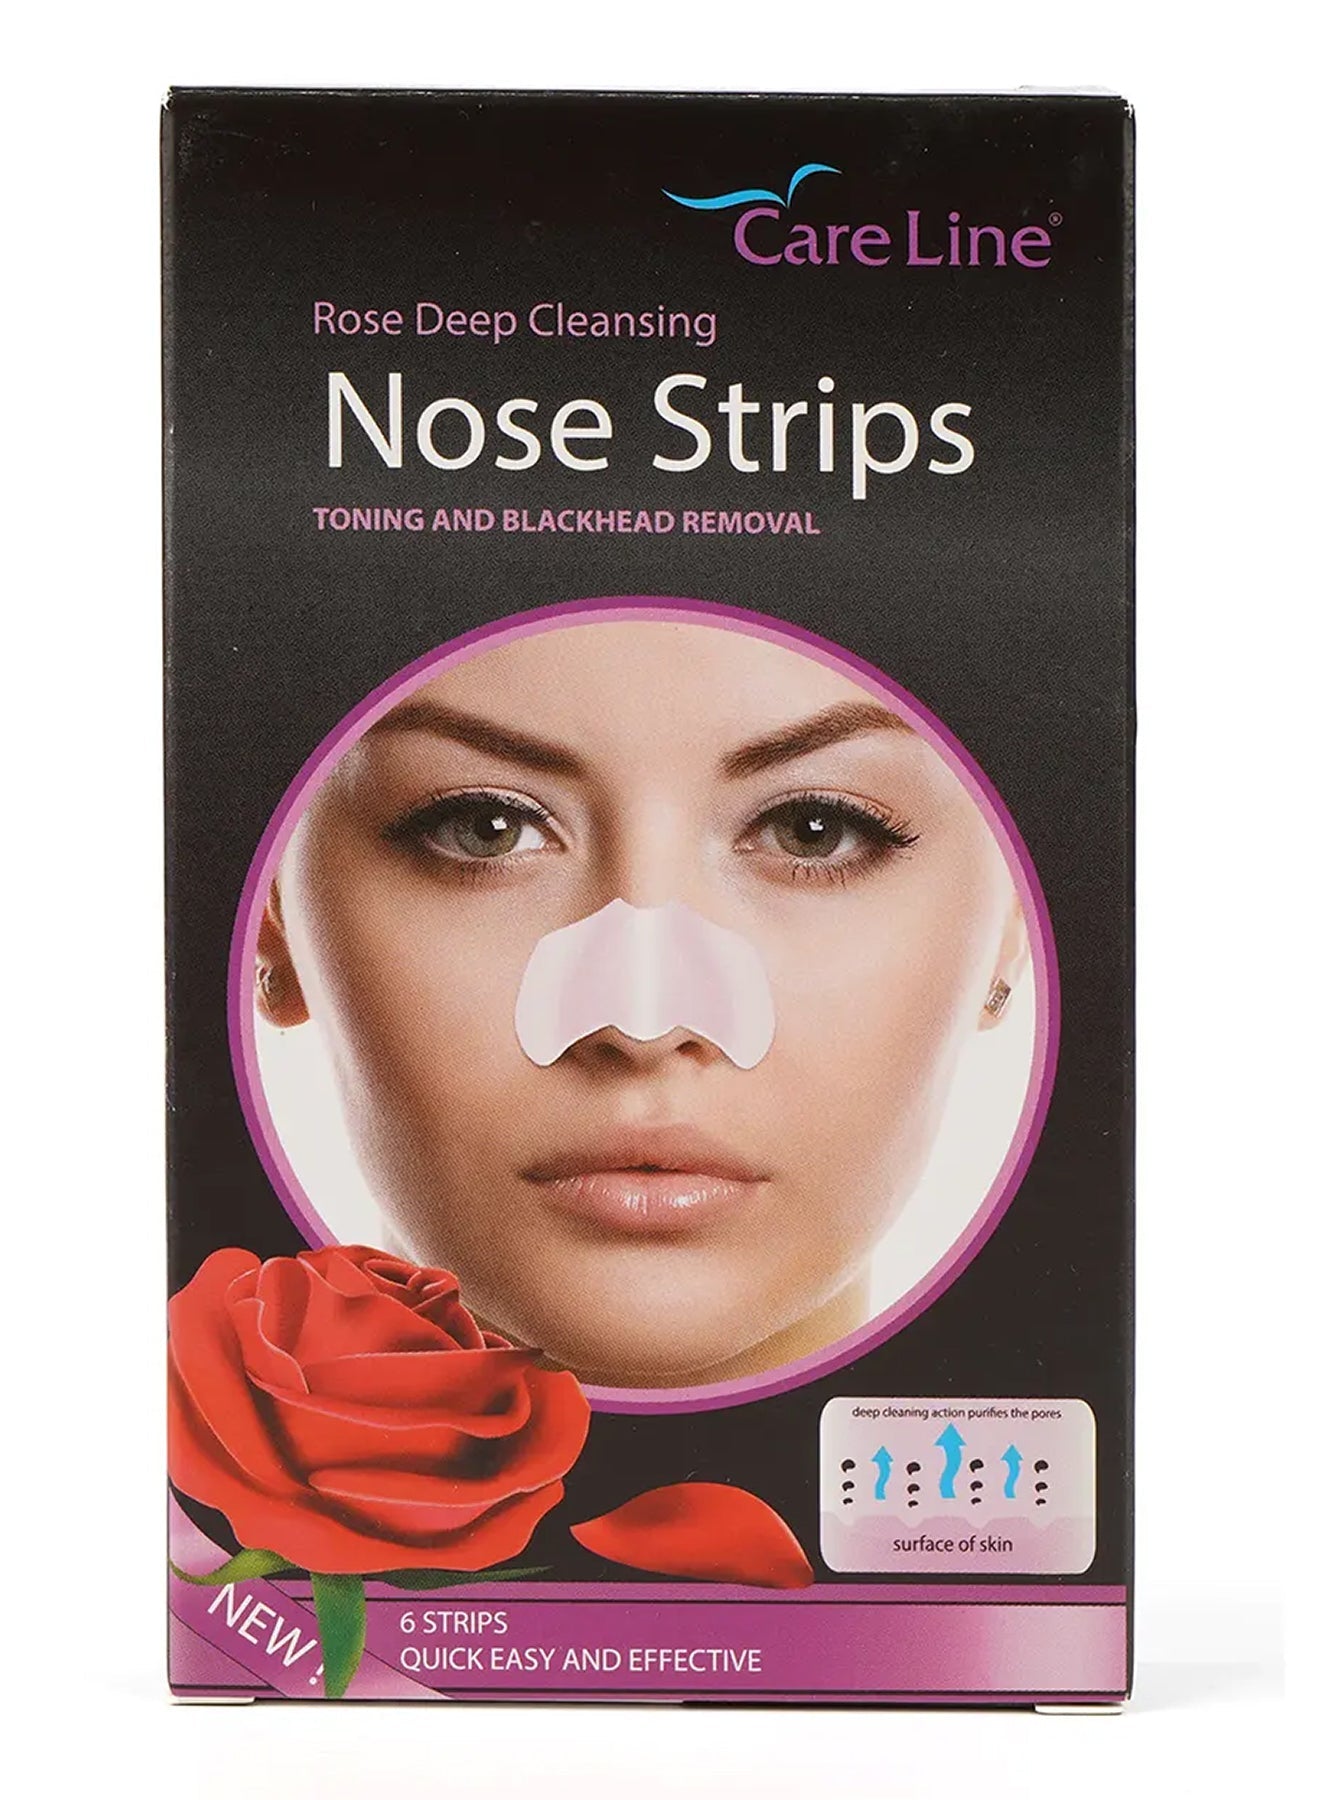 Care Line Nose Strips 6 Strips Rose Deep Cleansing 1pc Value Pack of 2 